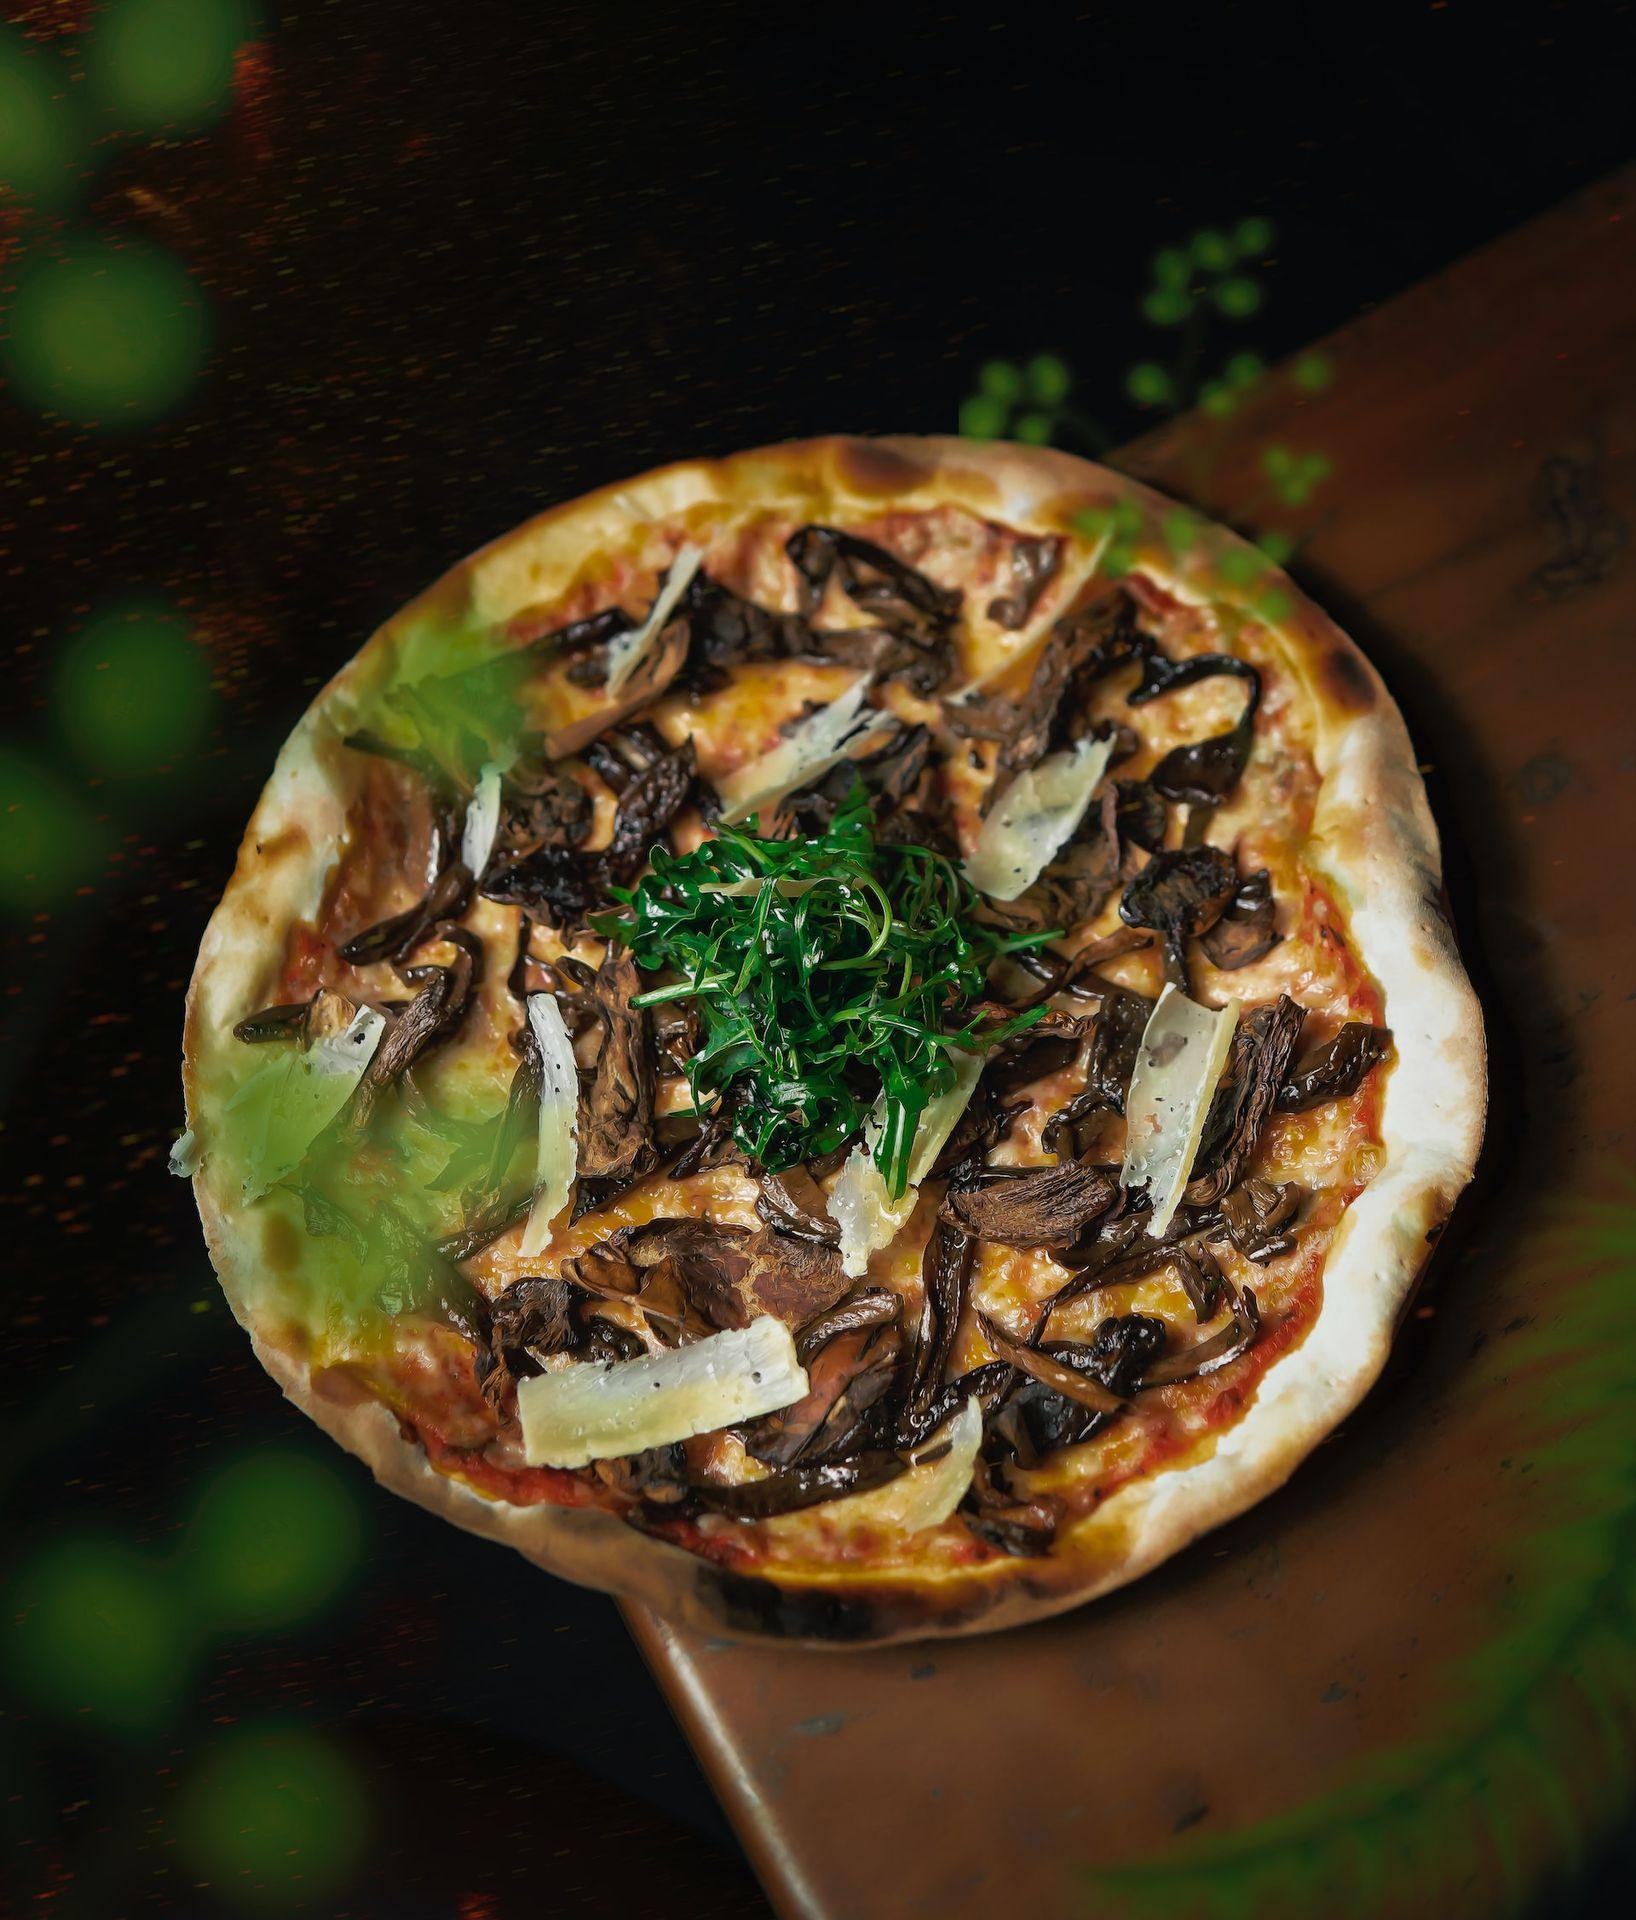 a pizza with mushrooms, cheese, and greens on it